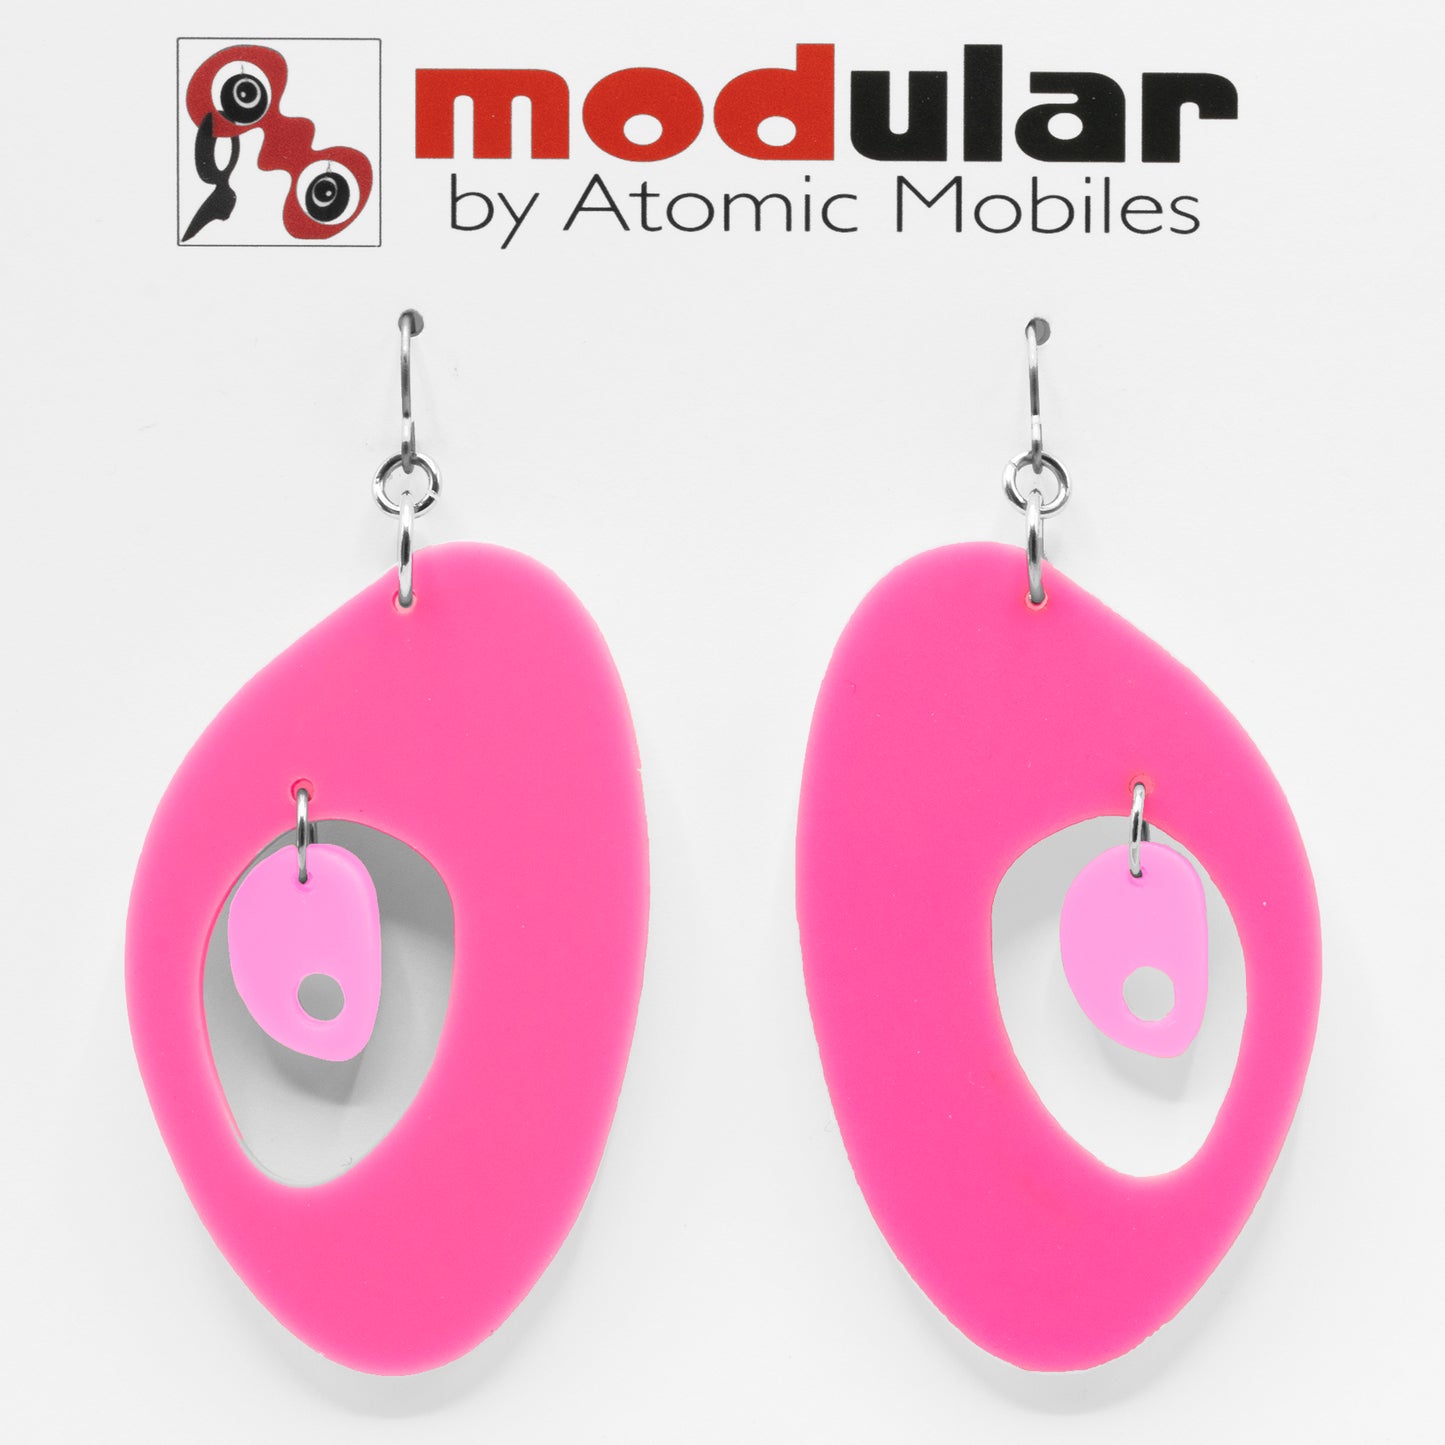 MODular Earrings - The Modernist Statement Earrings in Hot Pink by AtomicMobiles.com - retro era inspired mod handmade jewelry